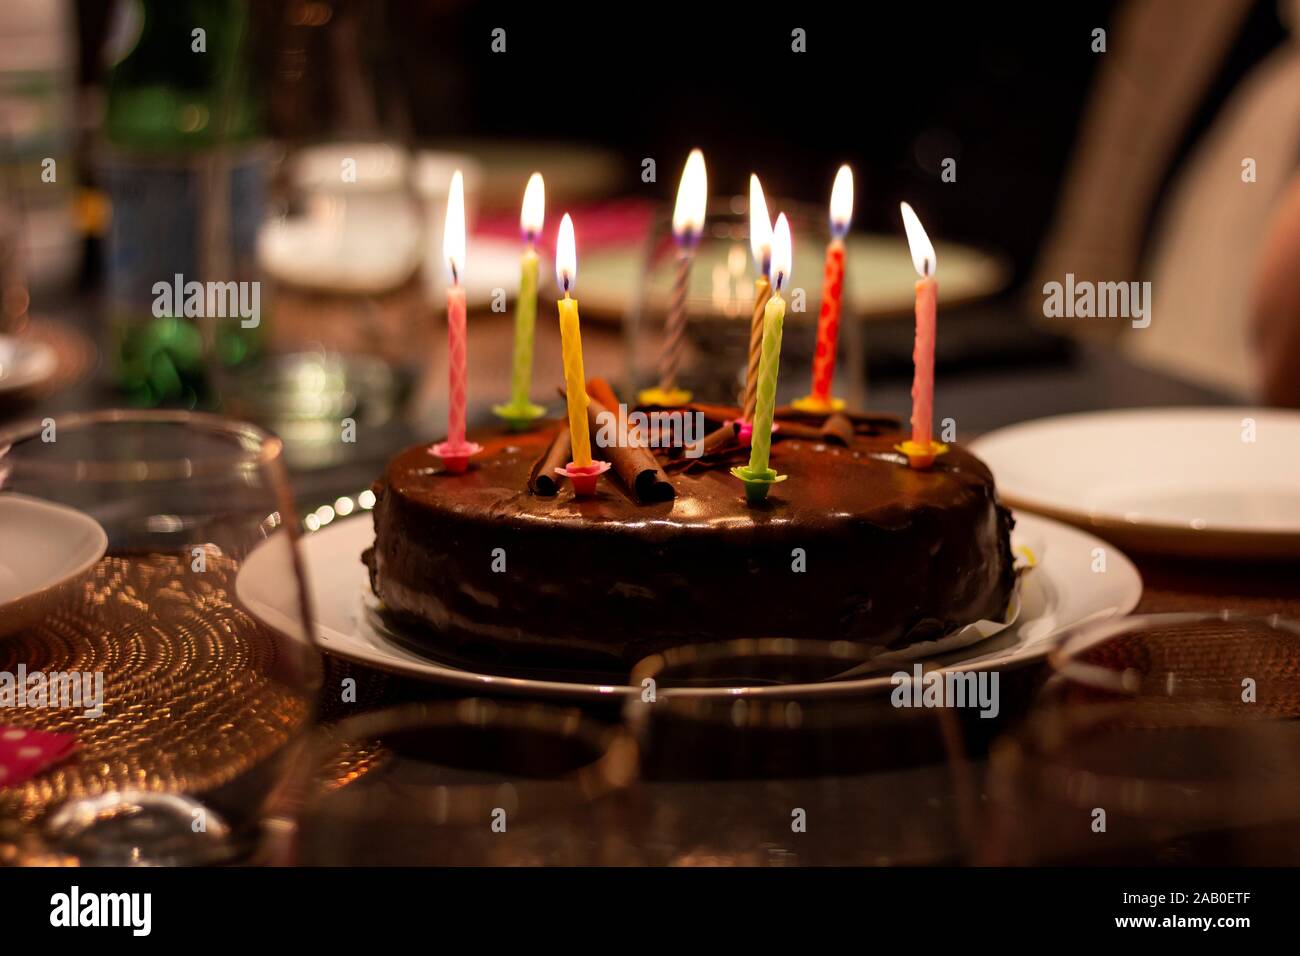 A portrait of a chocolate birthday cake with burning candles on it on a  festive dining table. The lit candles all have different colors Stock Photo  - Alamy